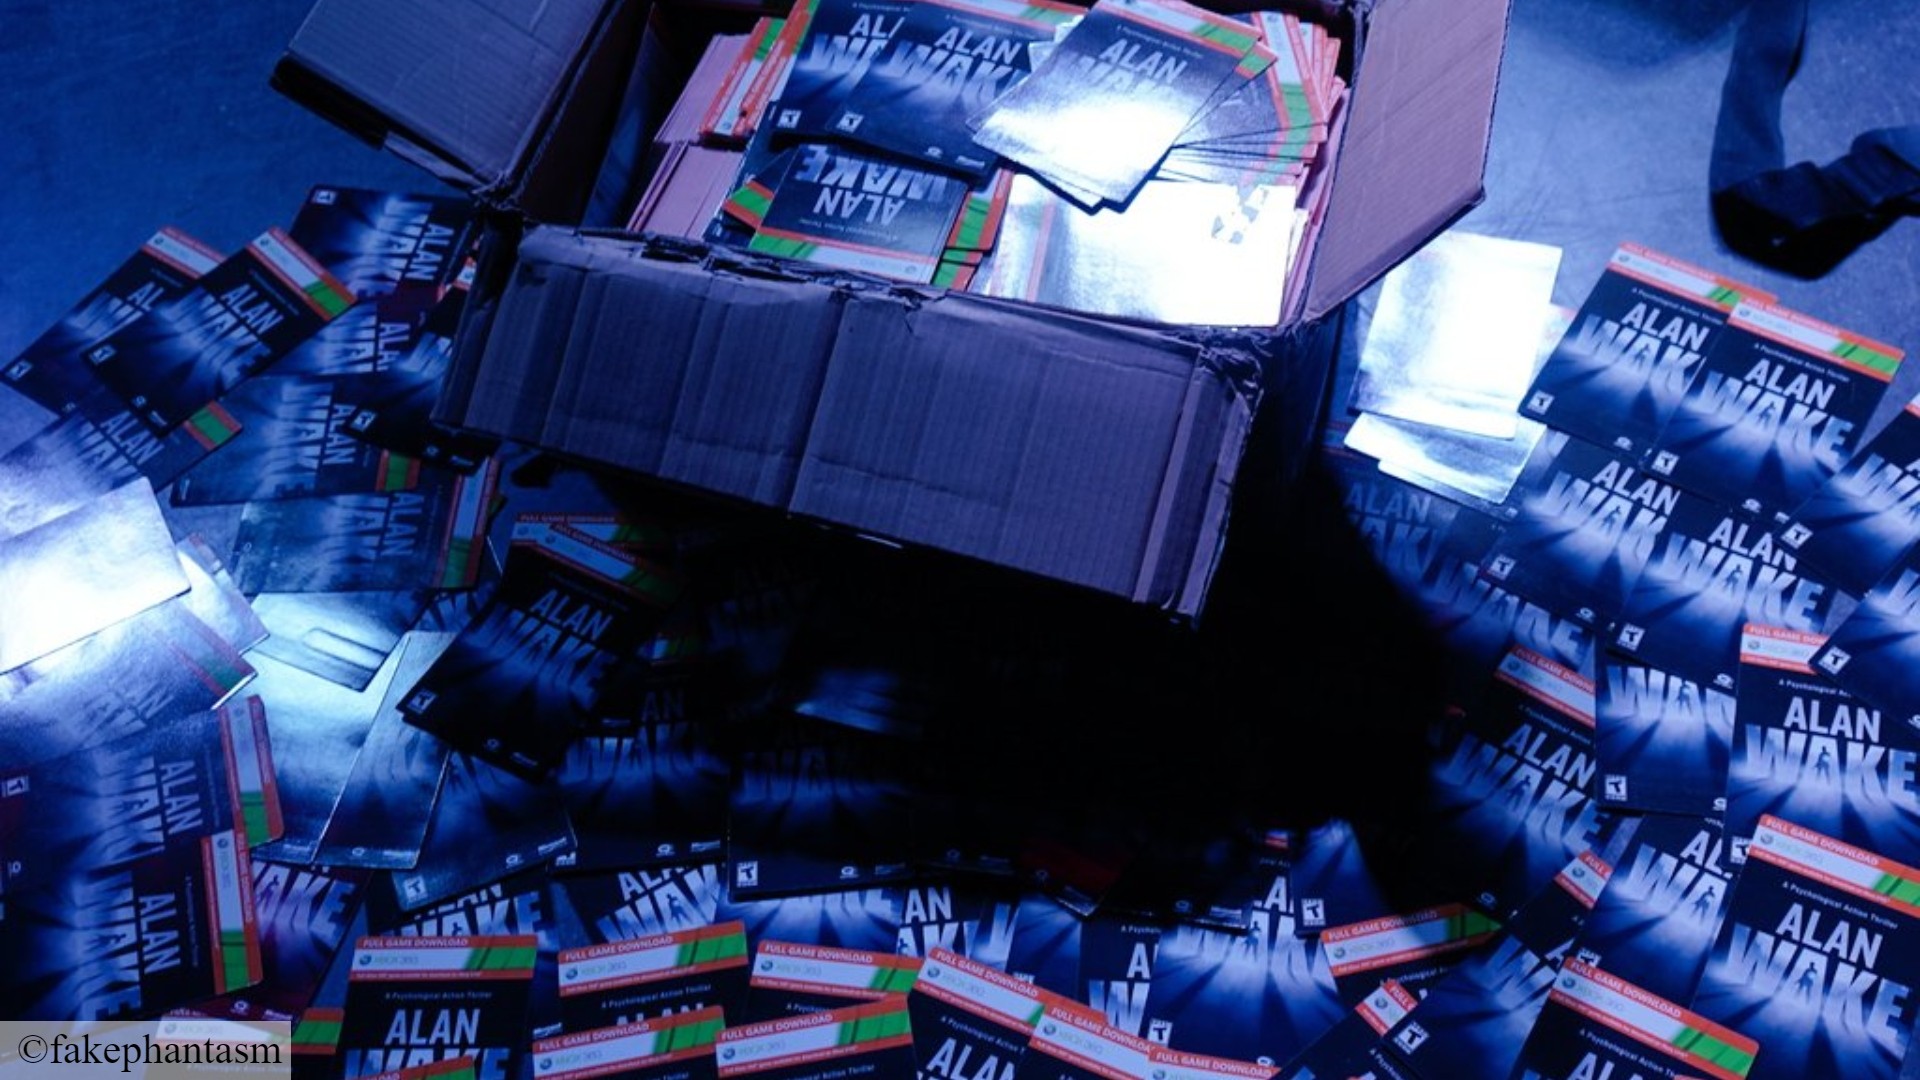 Alan Wake Steam horror game: A huge box of Alan Wake download cards